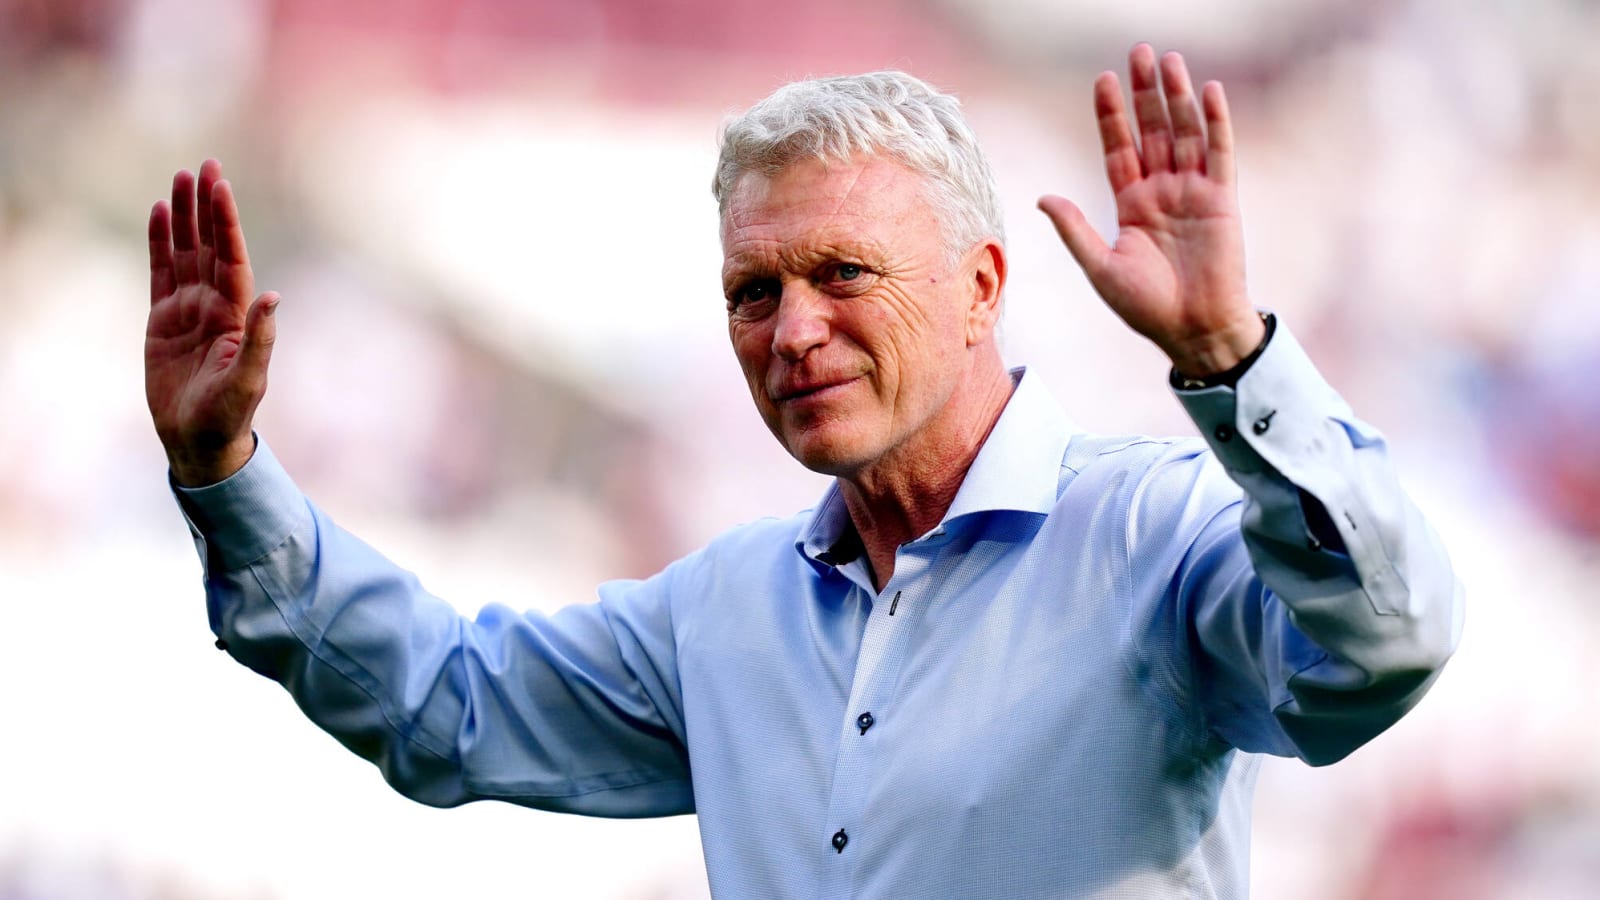 West Ham will be keen to do Arsenal a favour and give David Moyes a great send-off